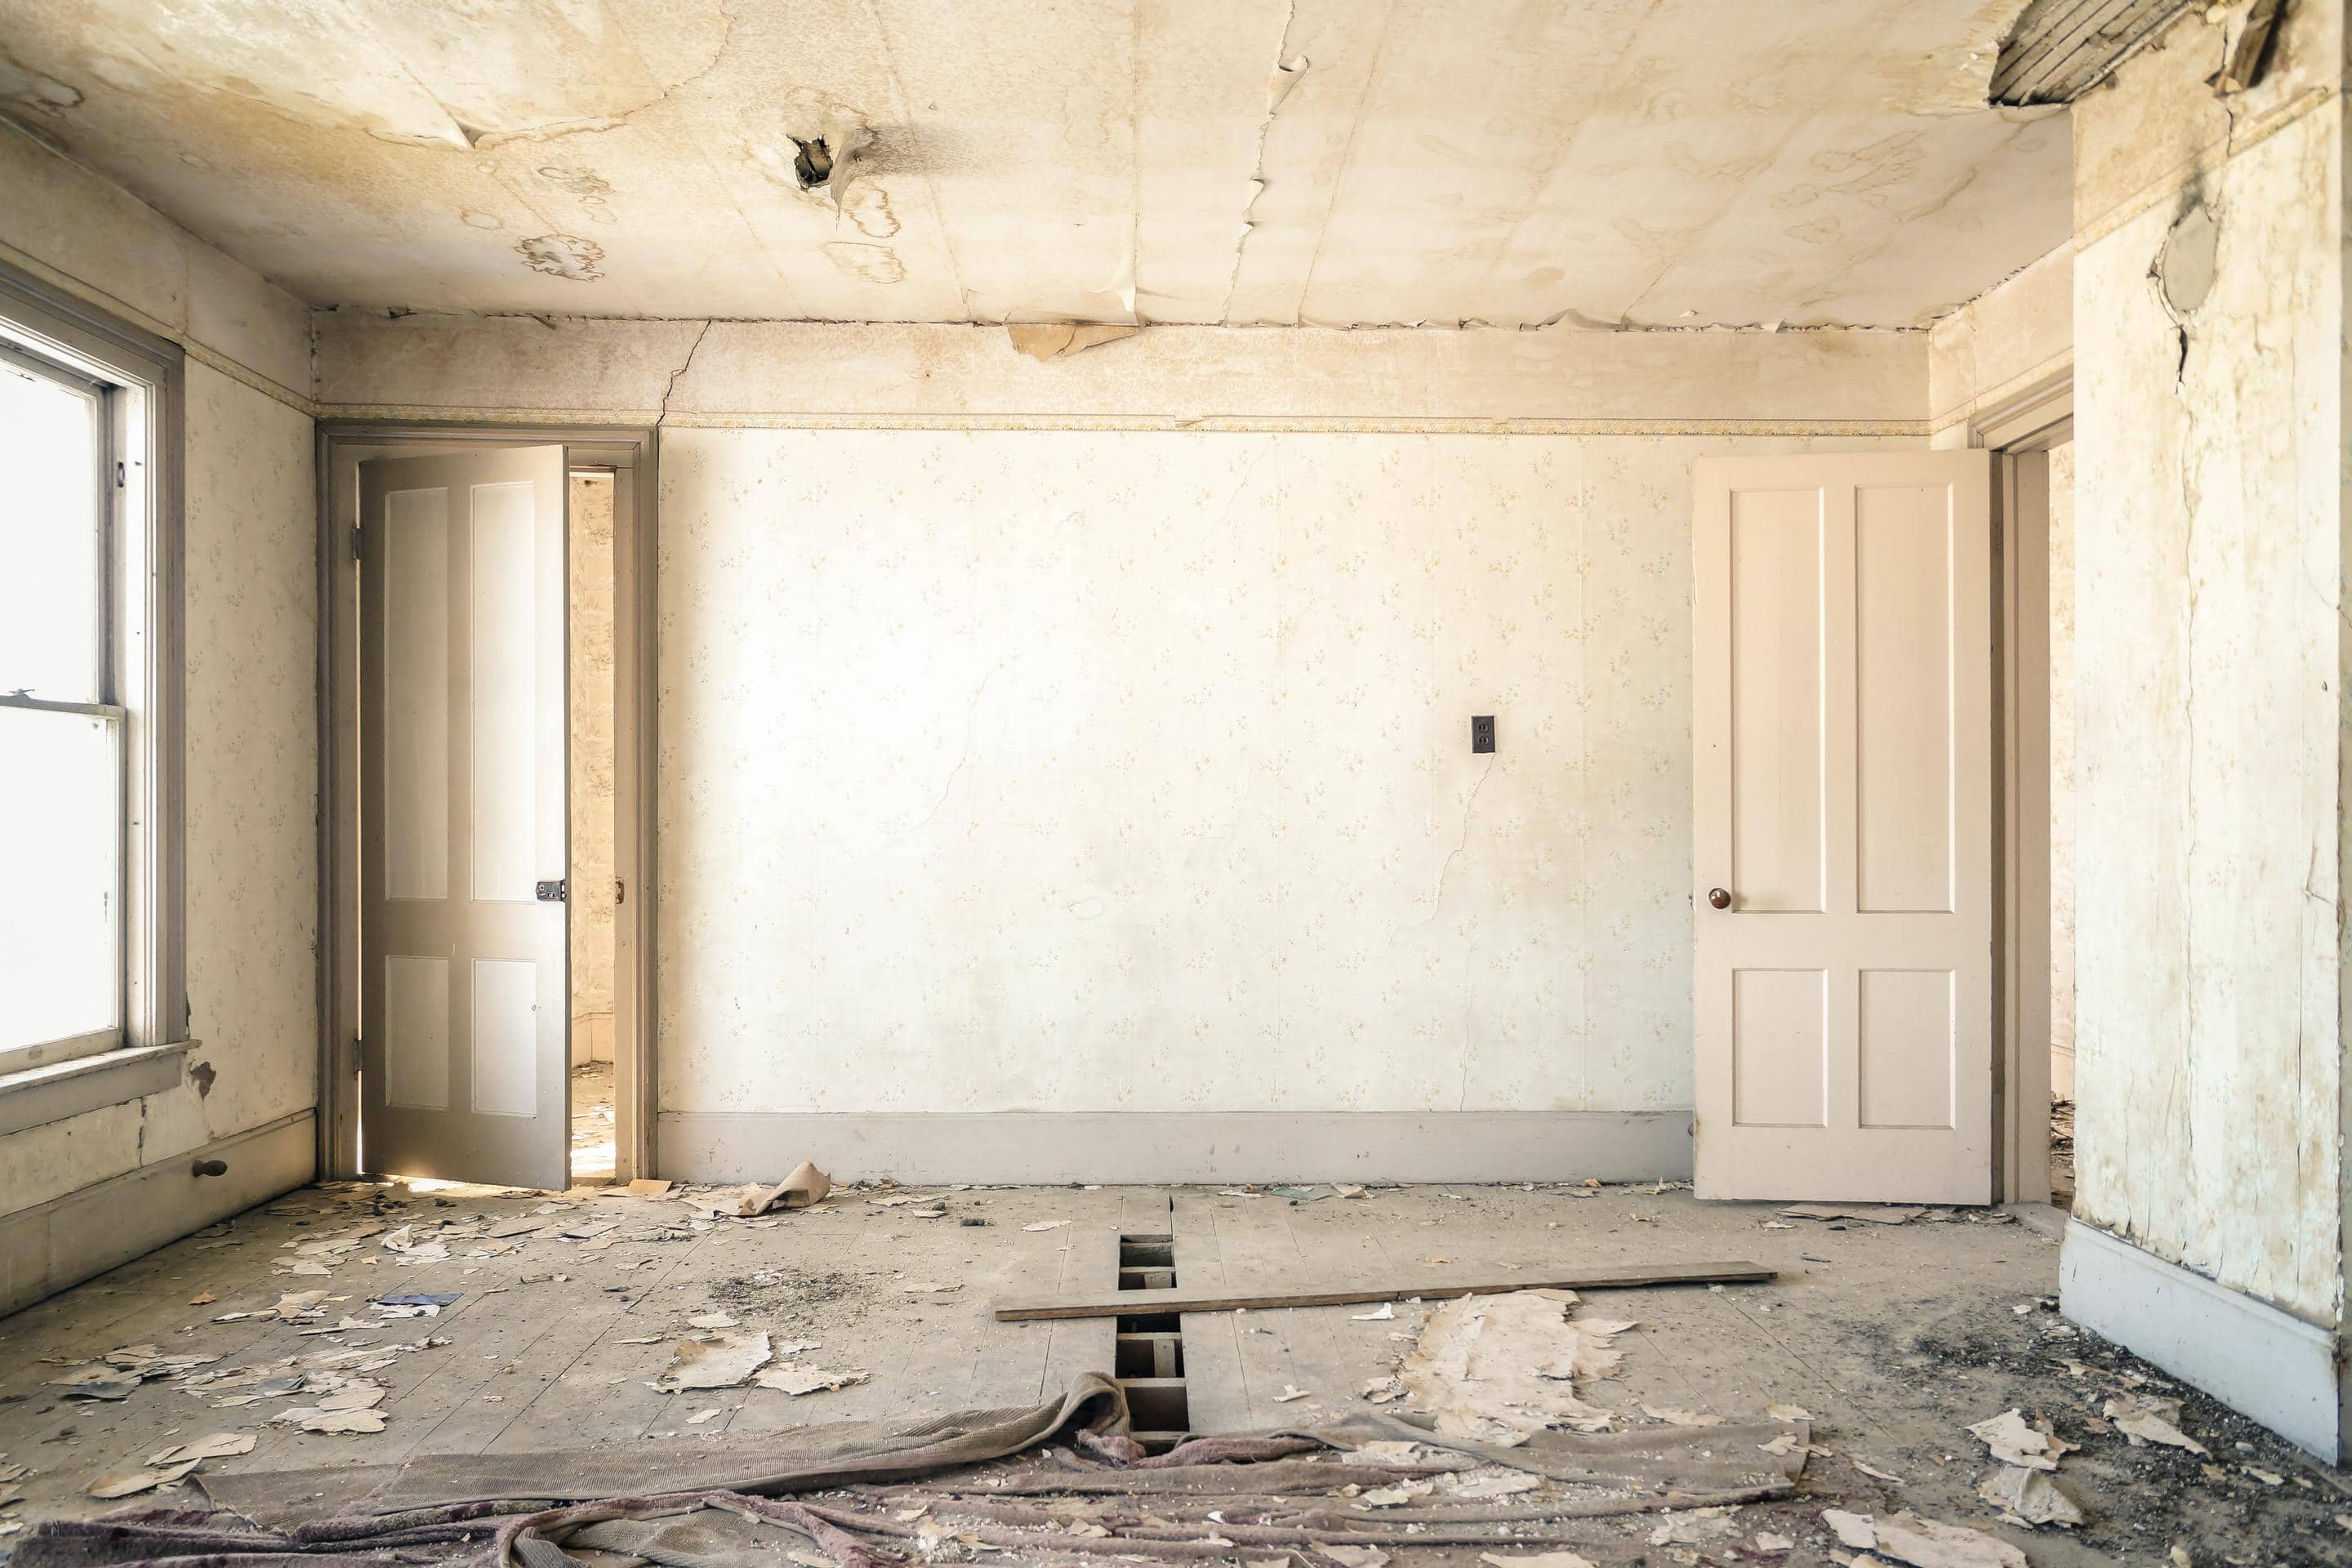 remodeling a home, demolition of your home.